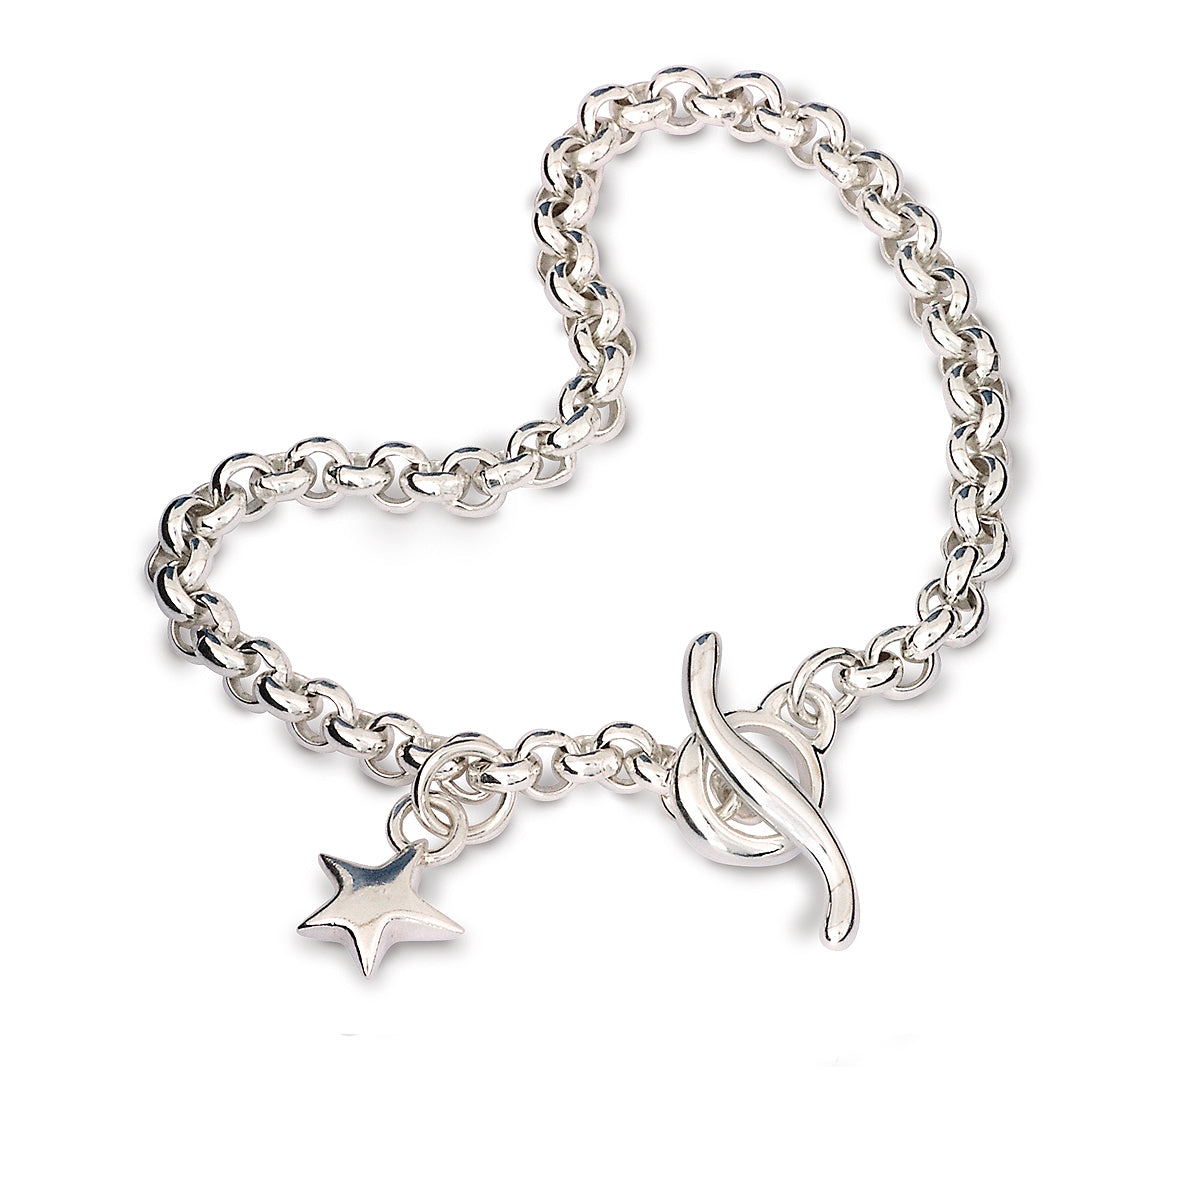 Classic vintage style solid silver charm bracelet belcher chain with star Scarlett Jewellery